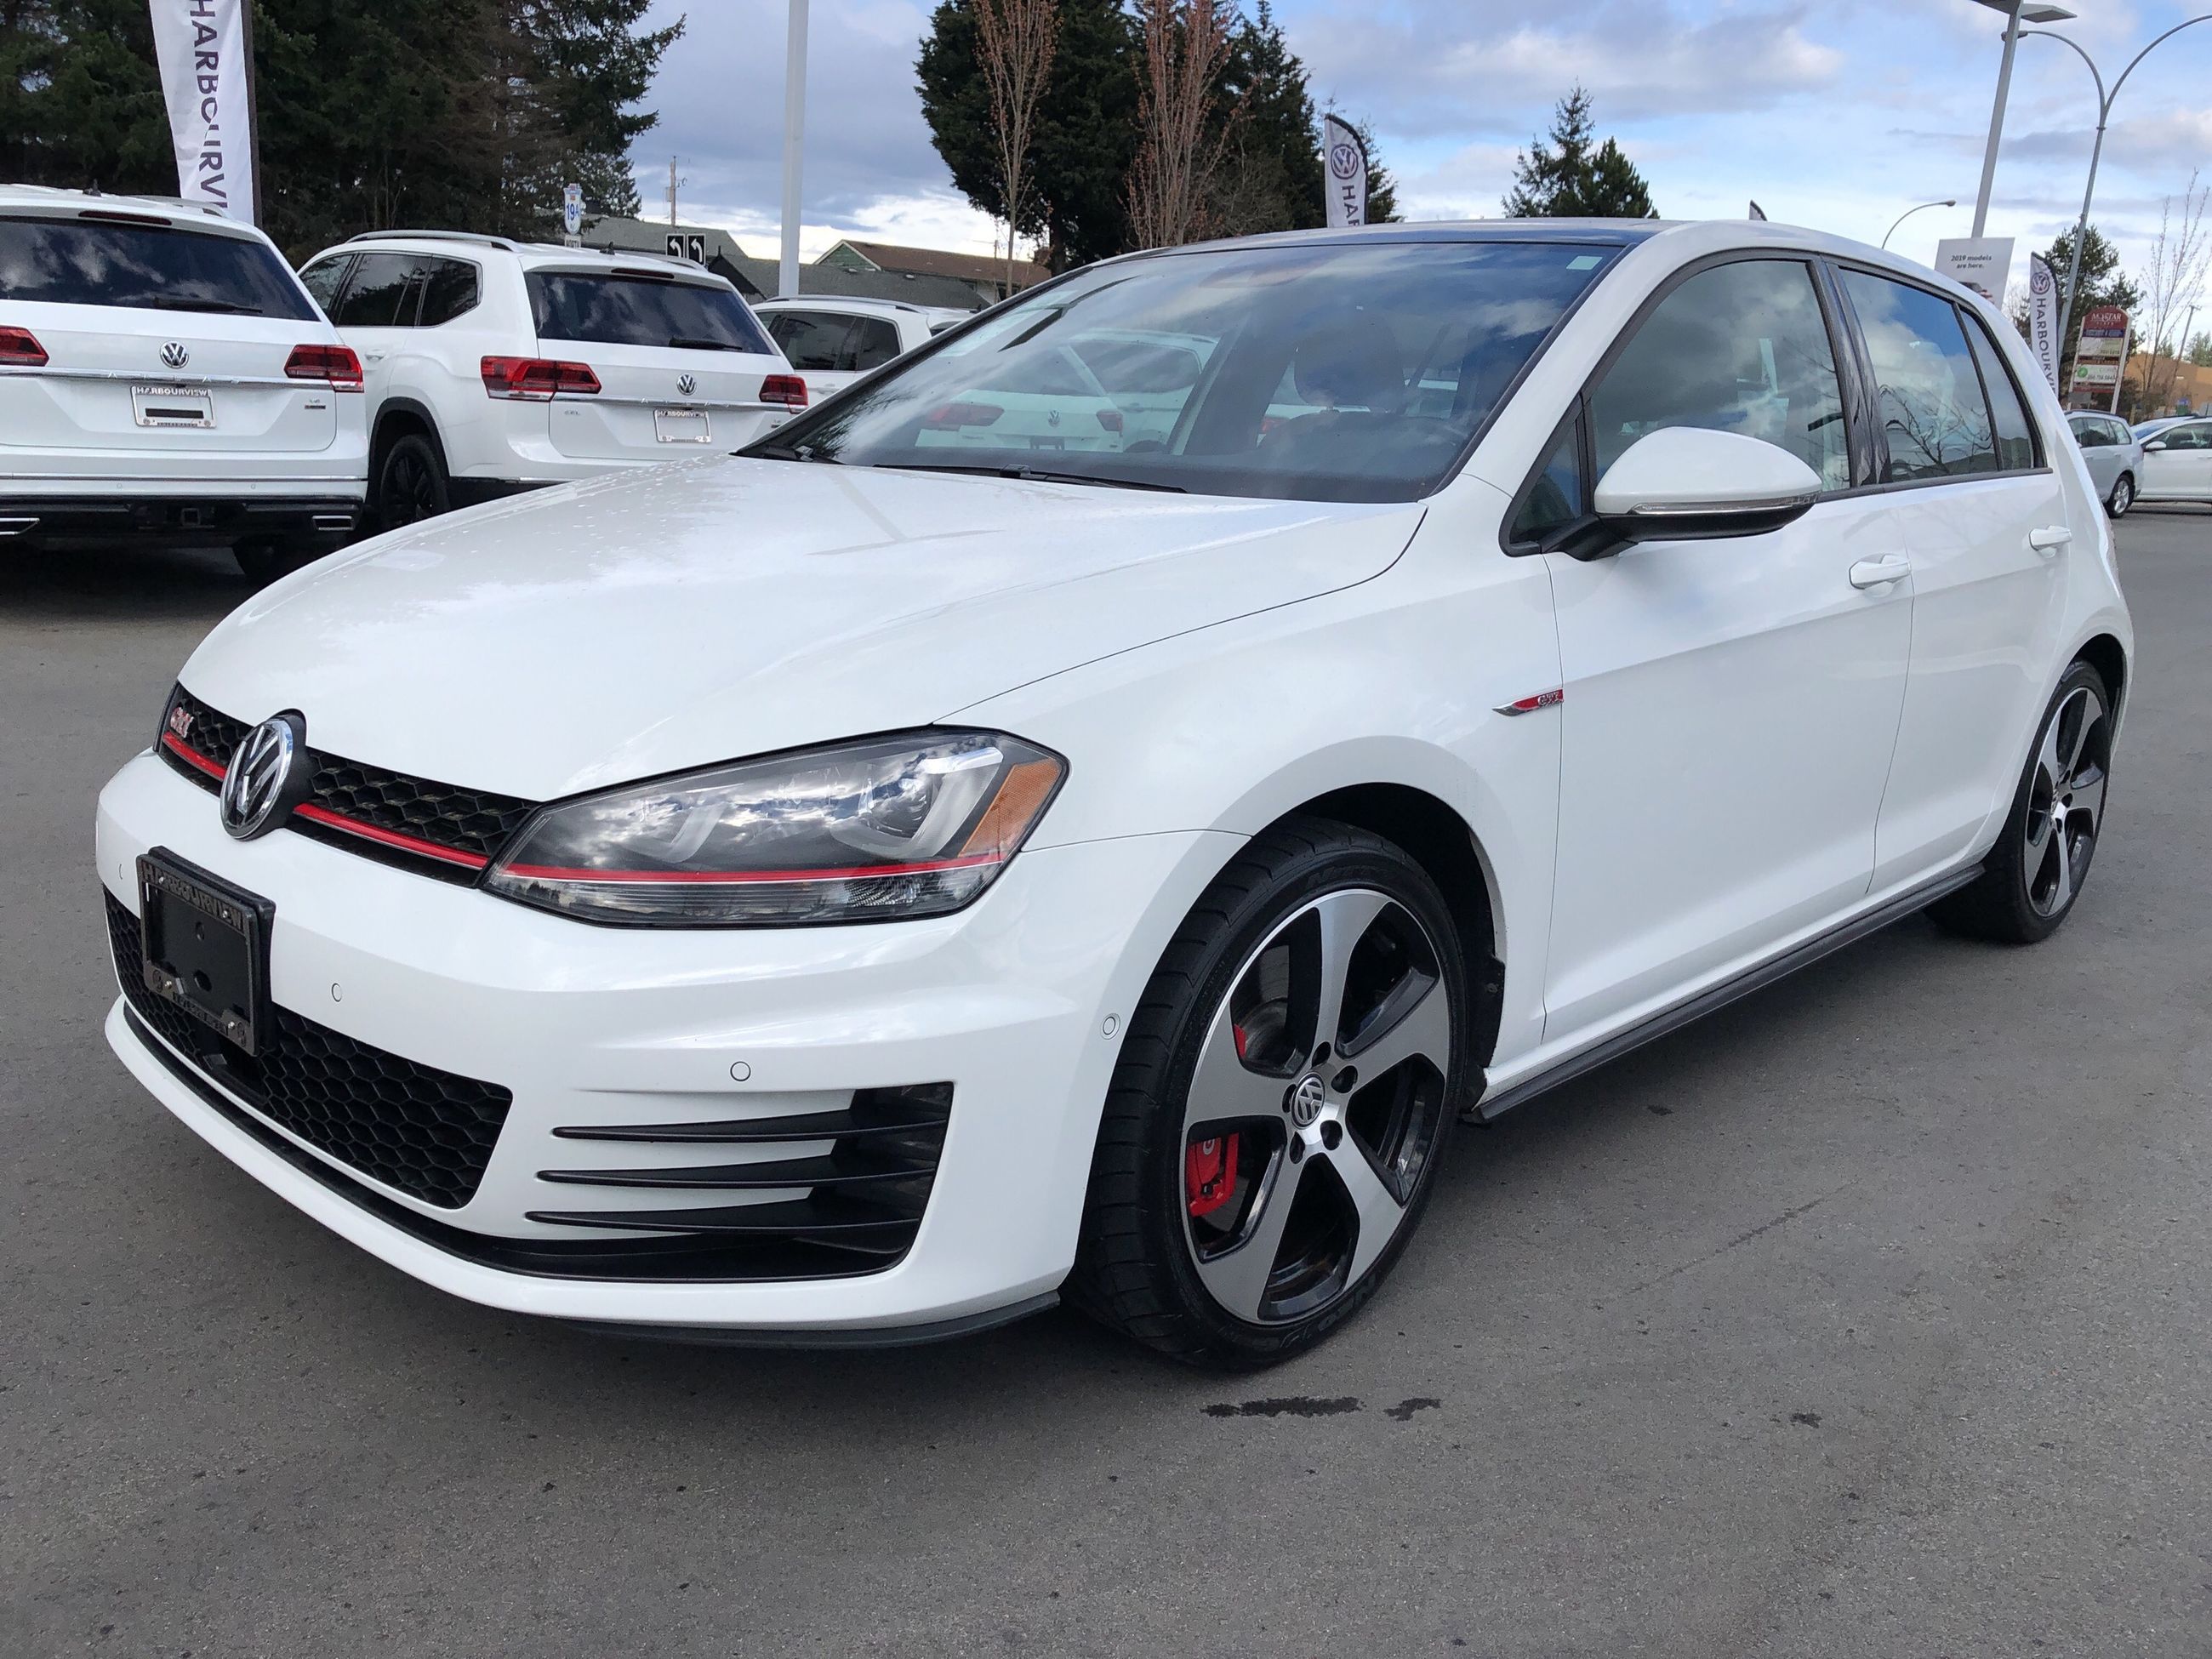 Used 2016 Volkswagen GTI Performance 6spd w/ Leather Pkg. for Sale